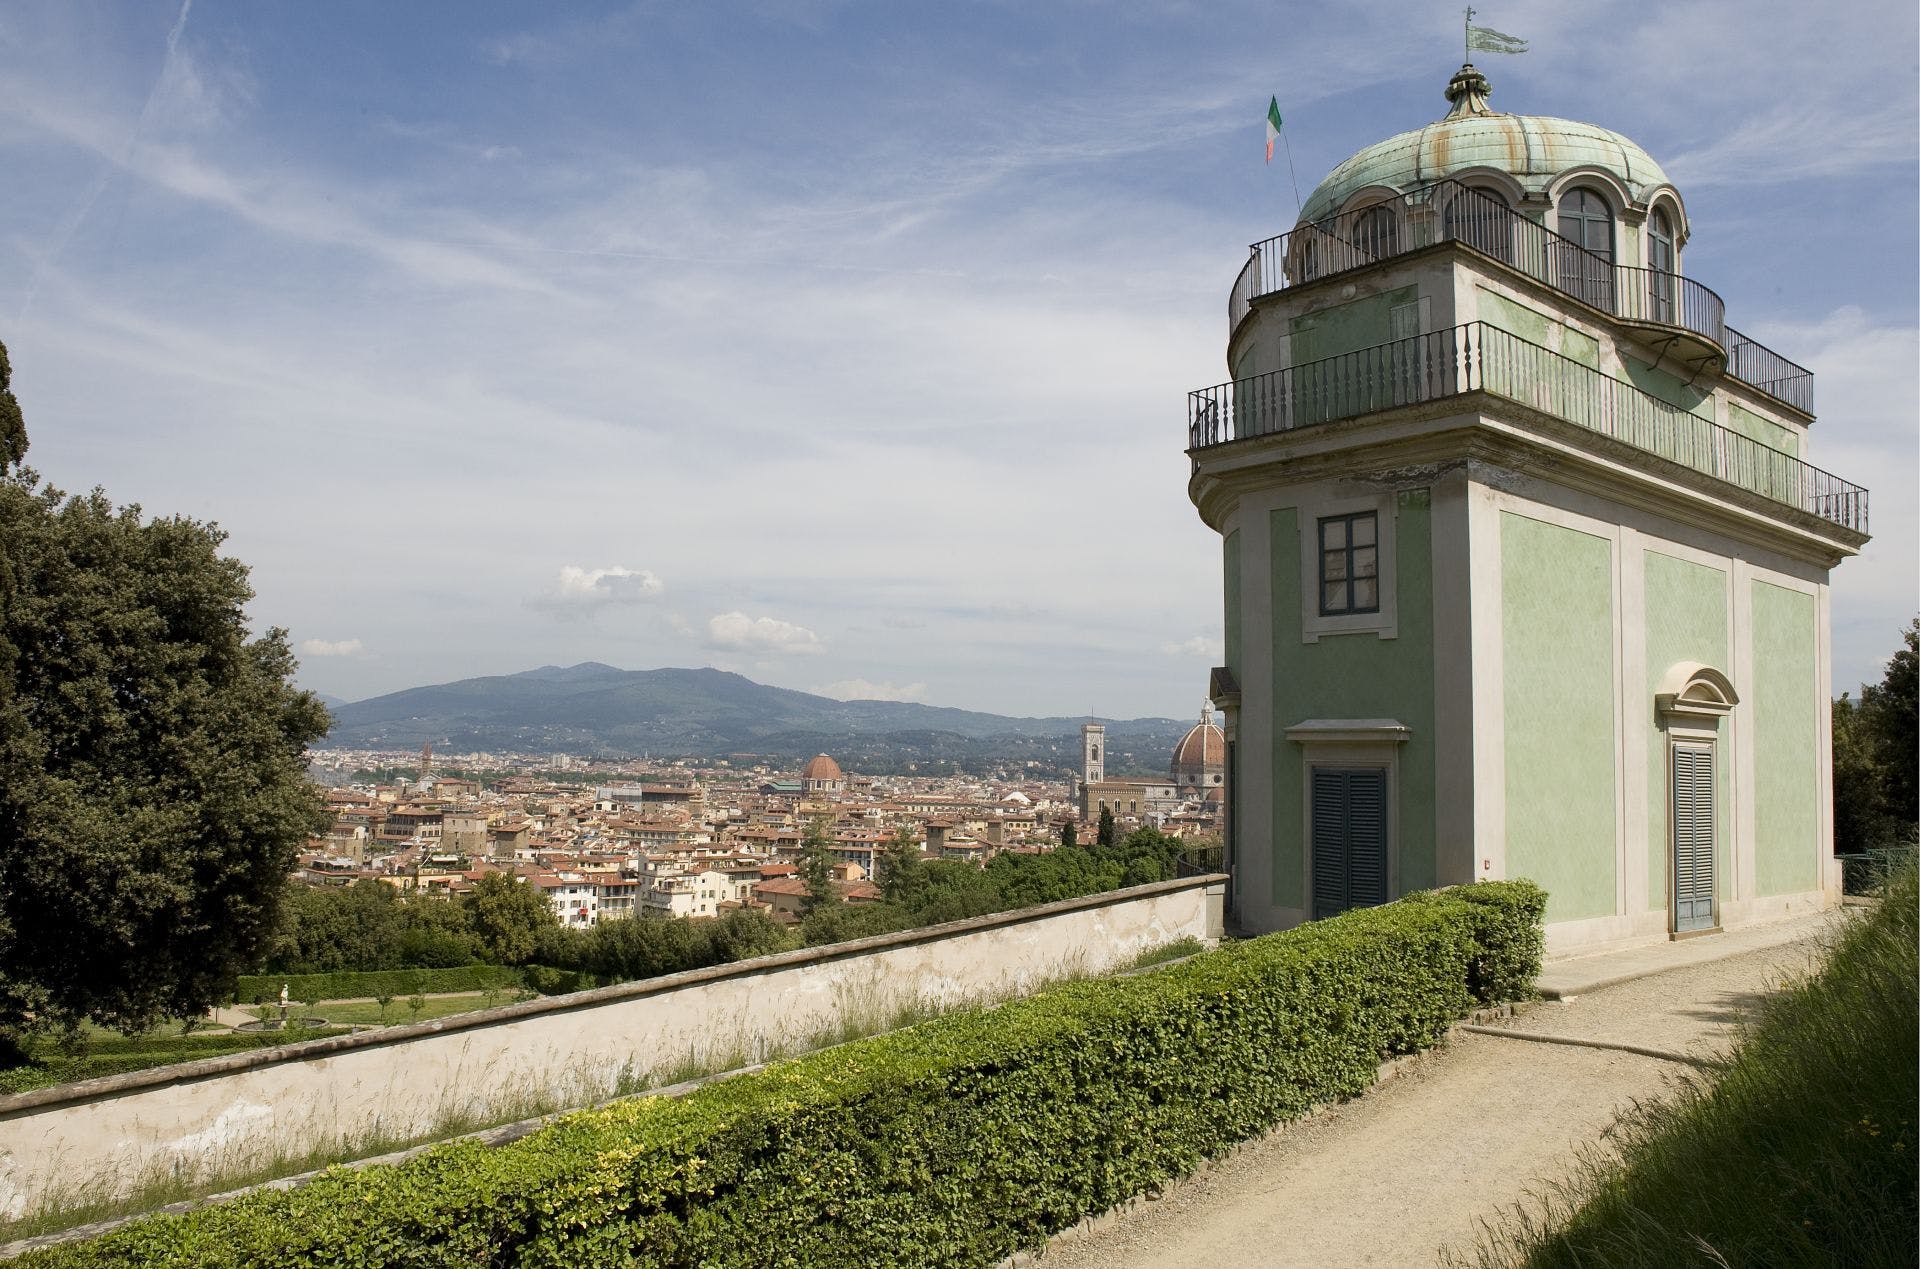 Hosted by the Boboli Gardens, the ERHG celebrates its VI Annual Forum on May 25th and 26th in Florence, Italy